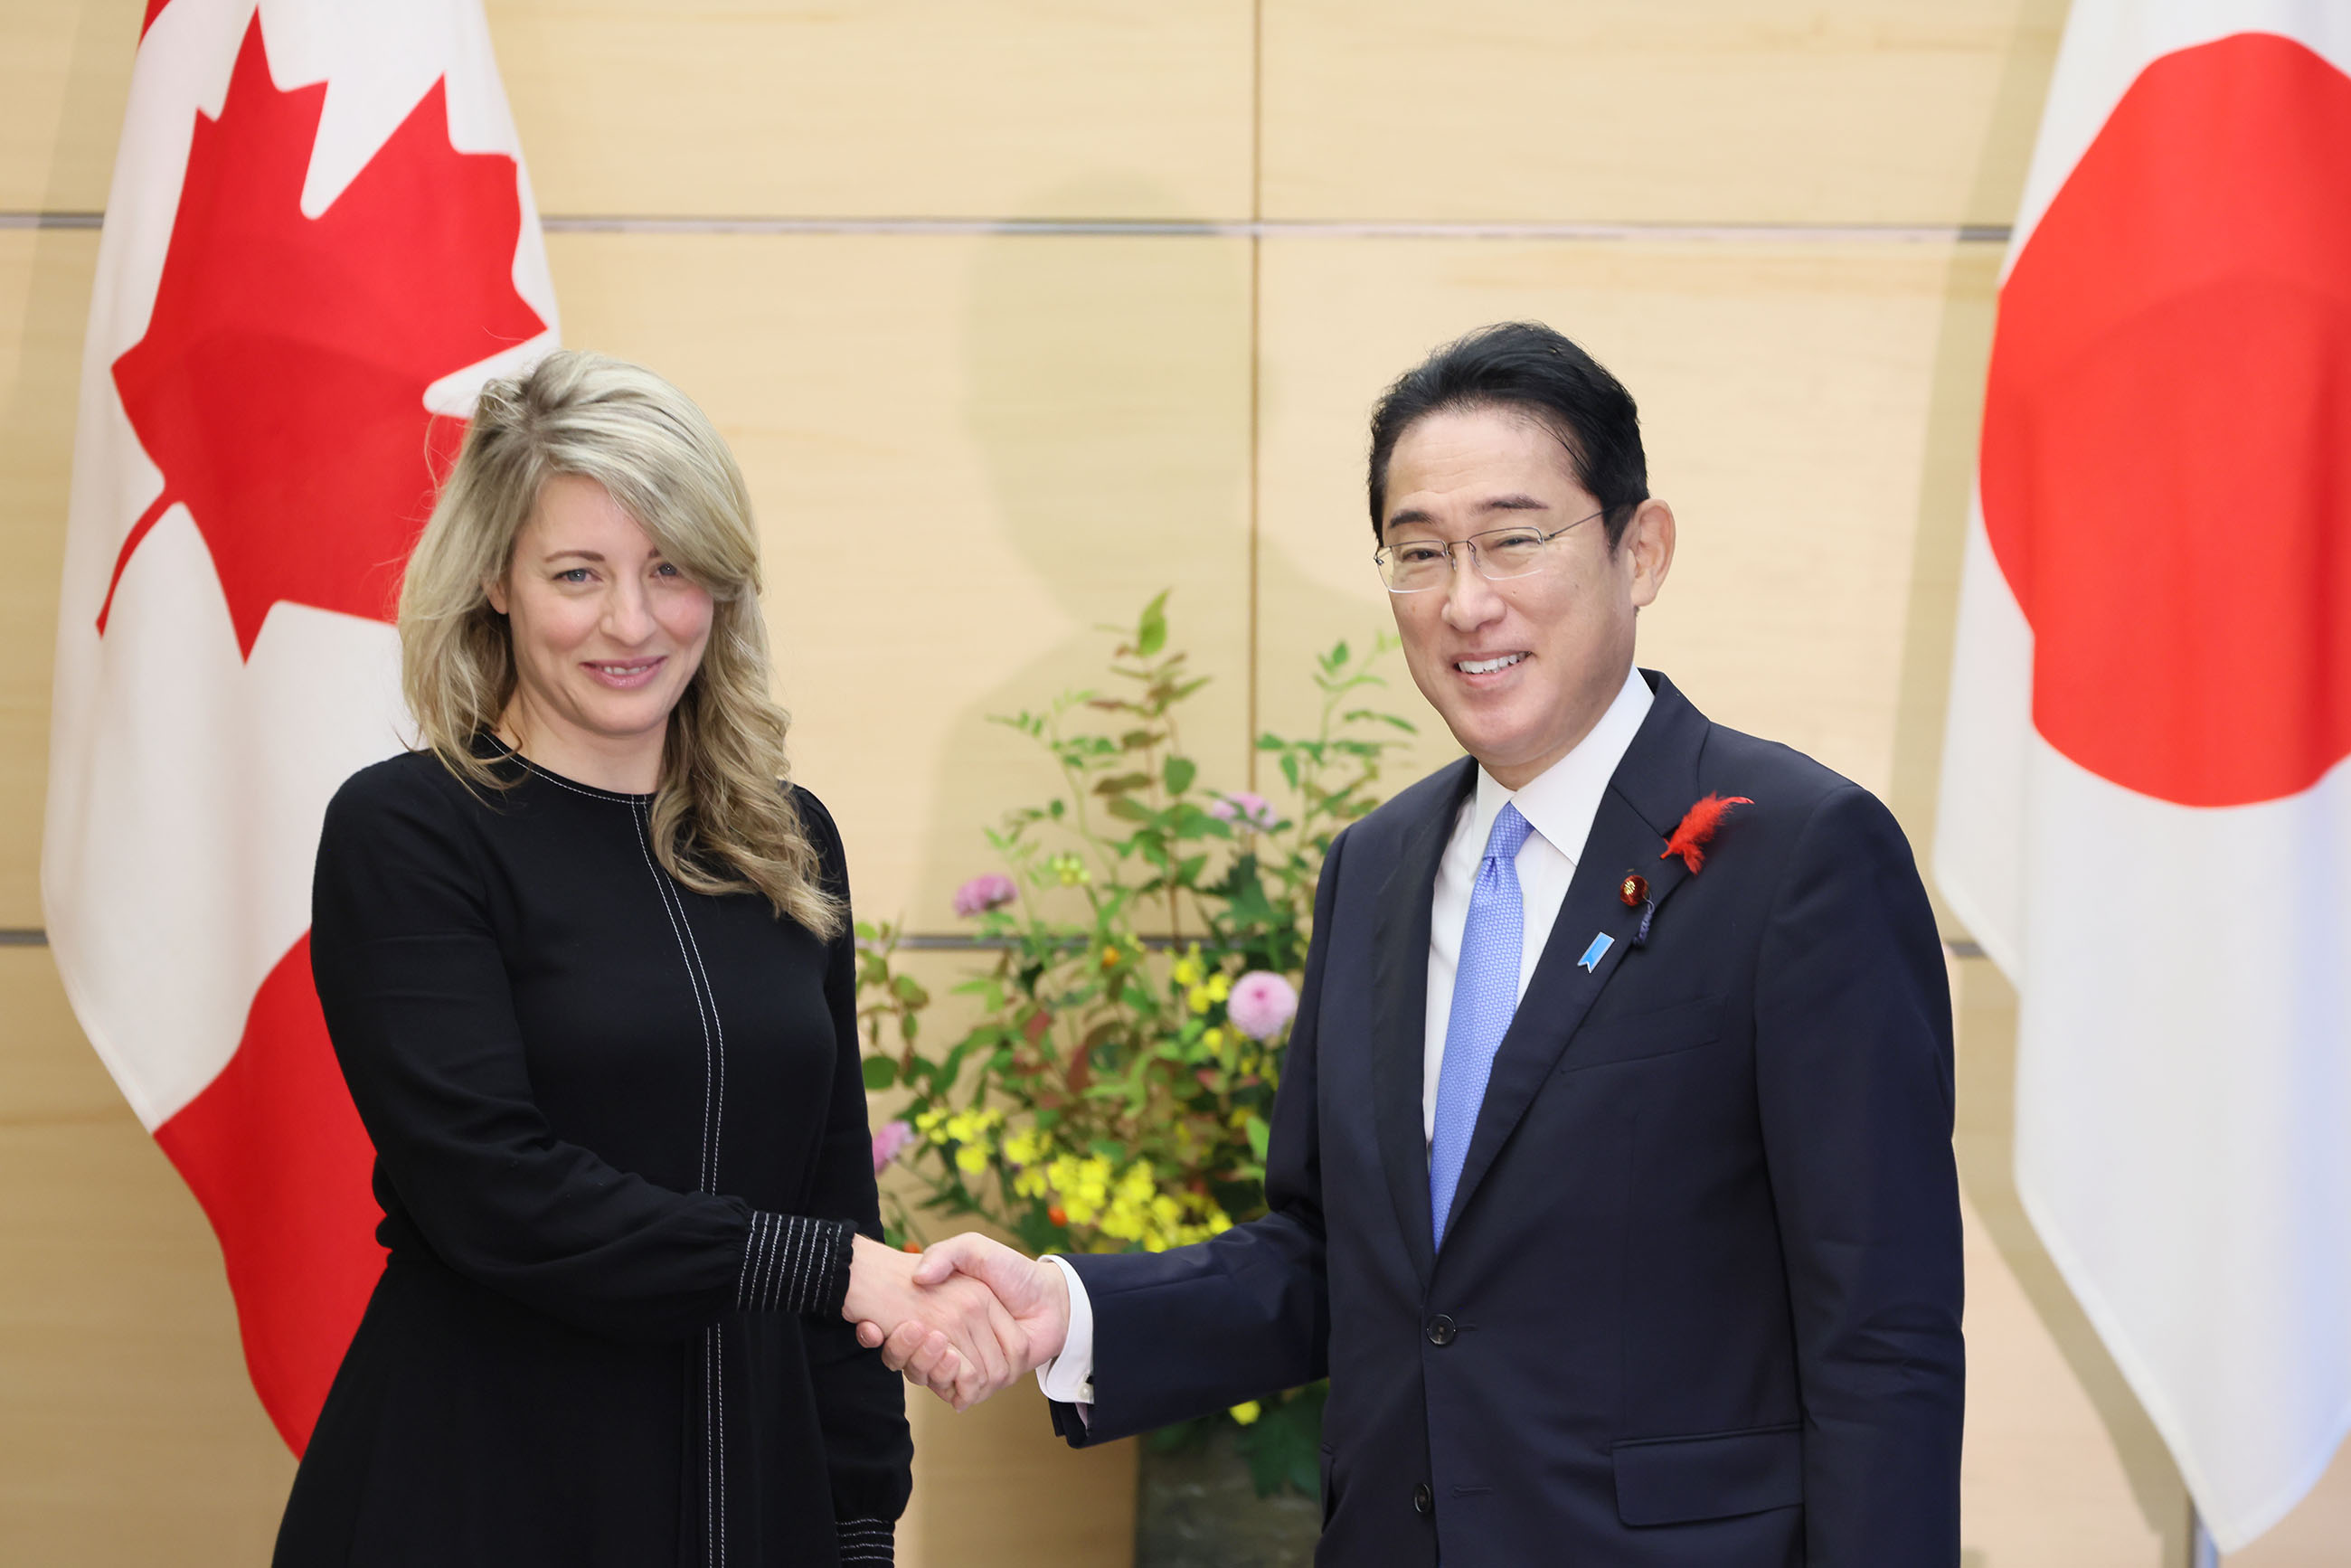 Courtesy Call from Foreign Minister Mélanie Joly of Canada